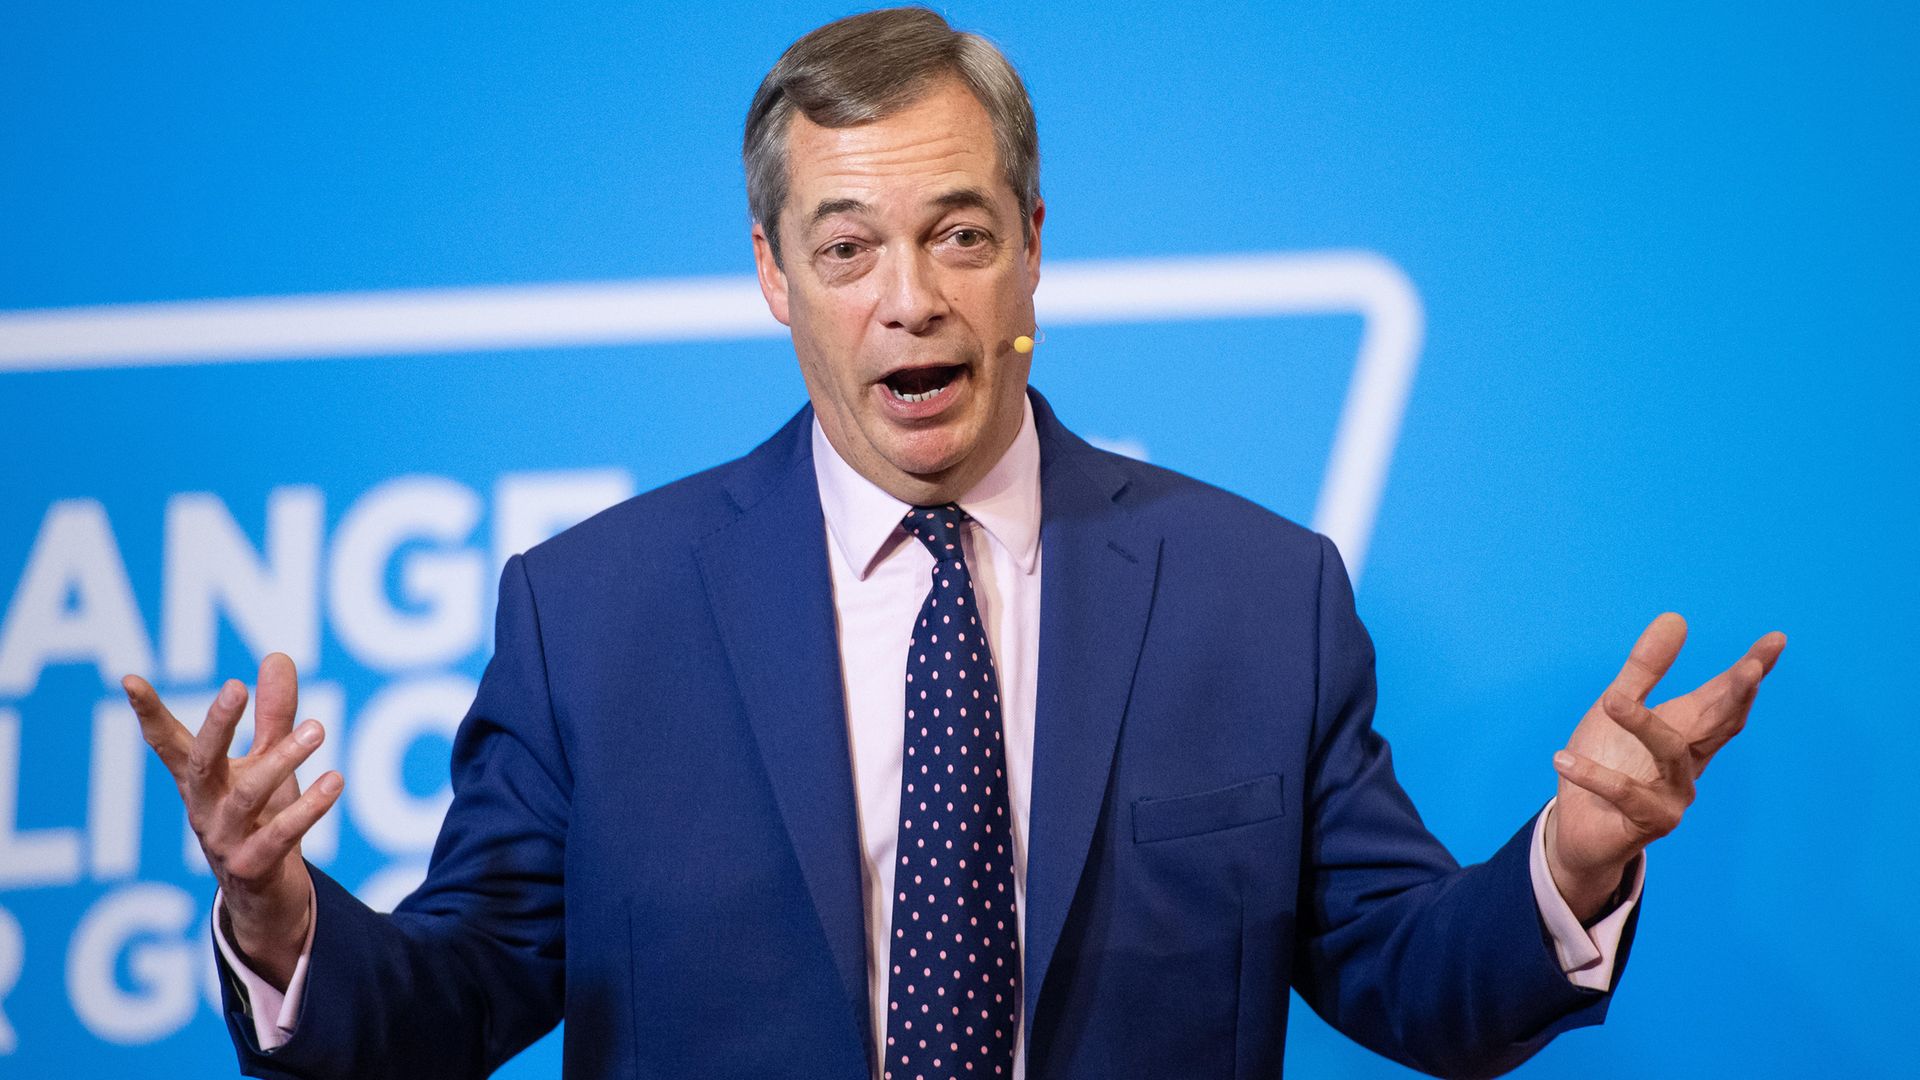 Brexit Party leader Nigel Farage during a press conference at the Emmanuel Centre in London, while on the General Election campaign trail. - Credit: PA